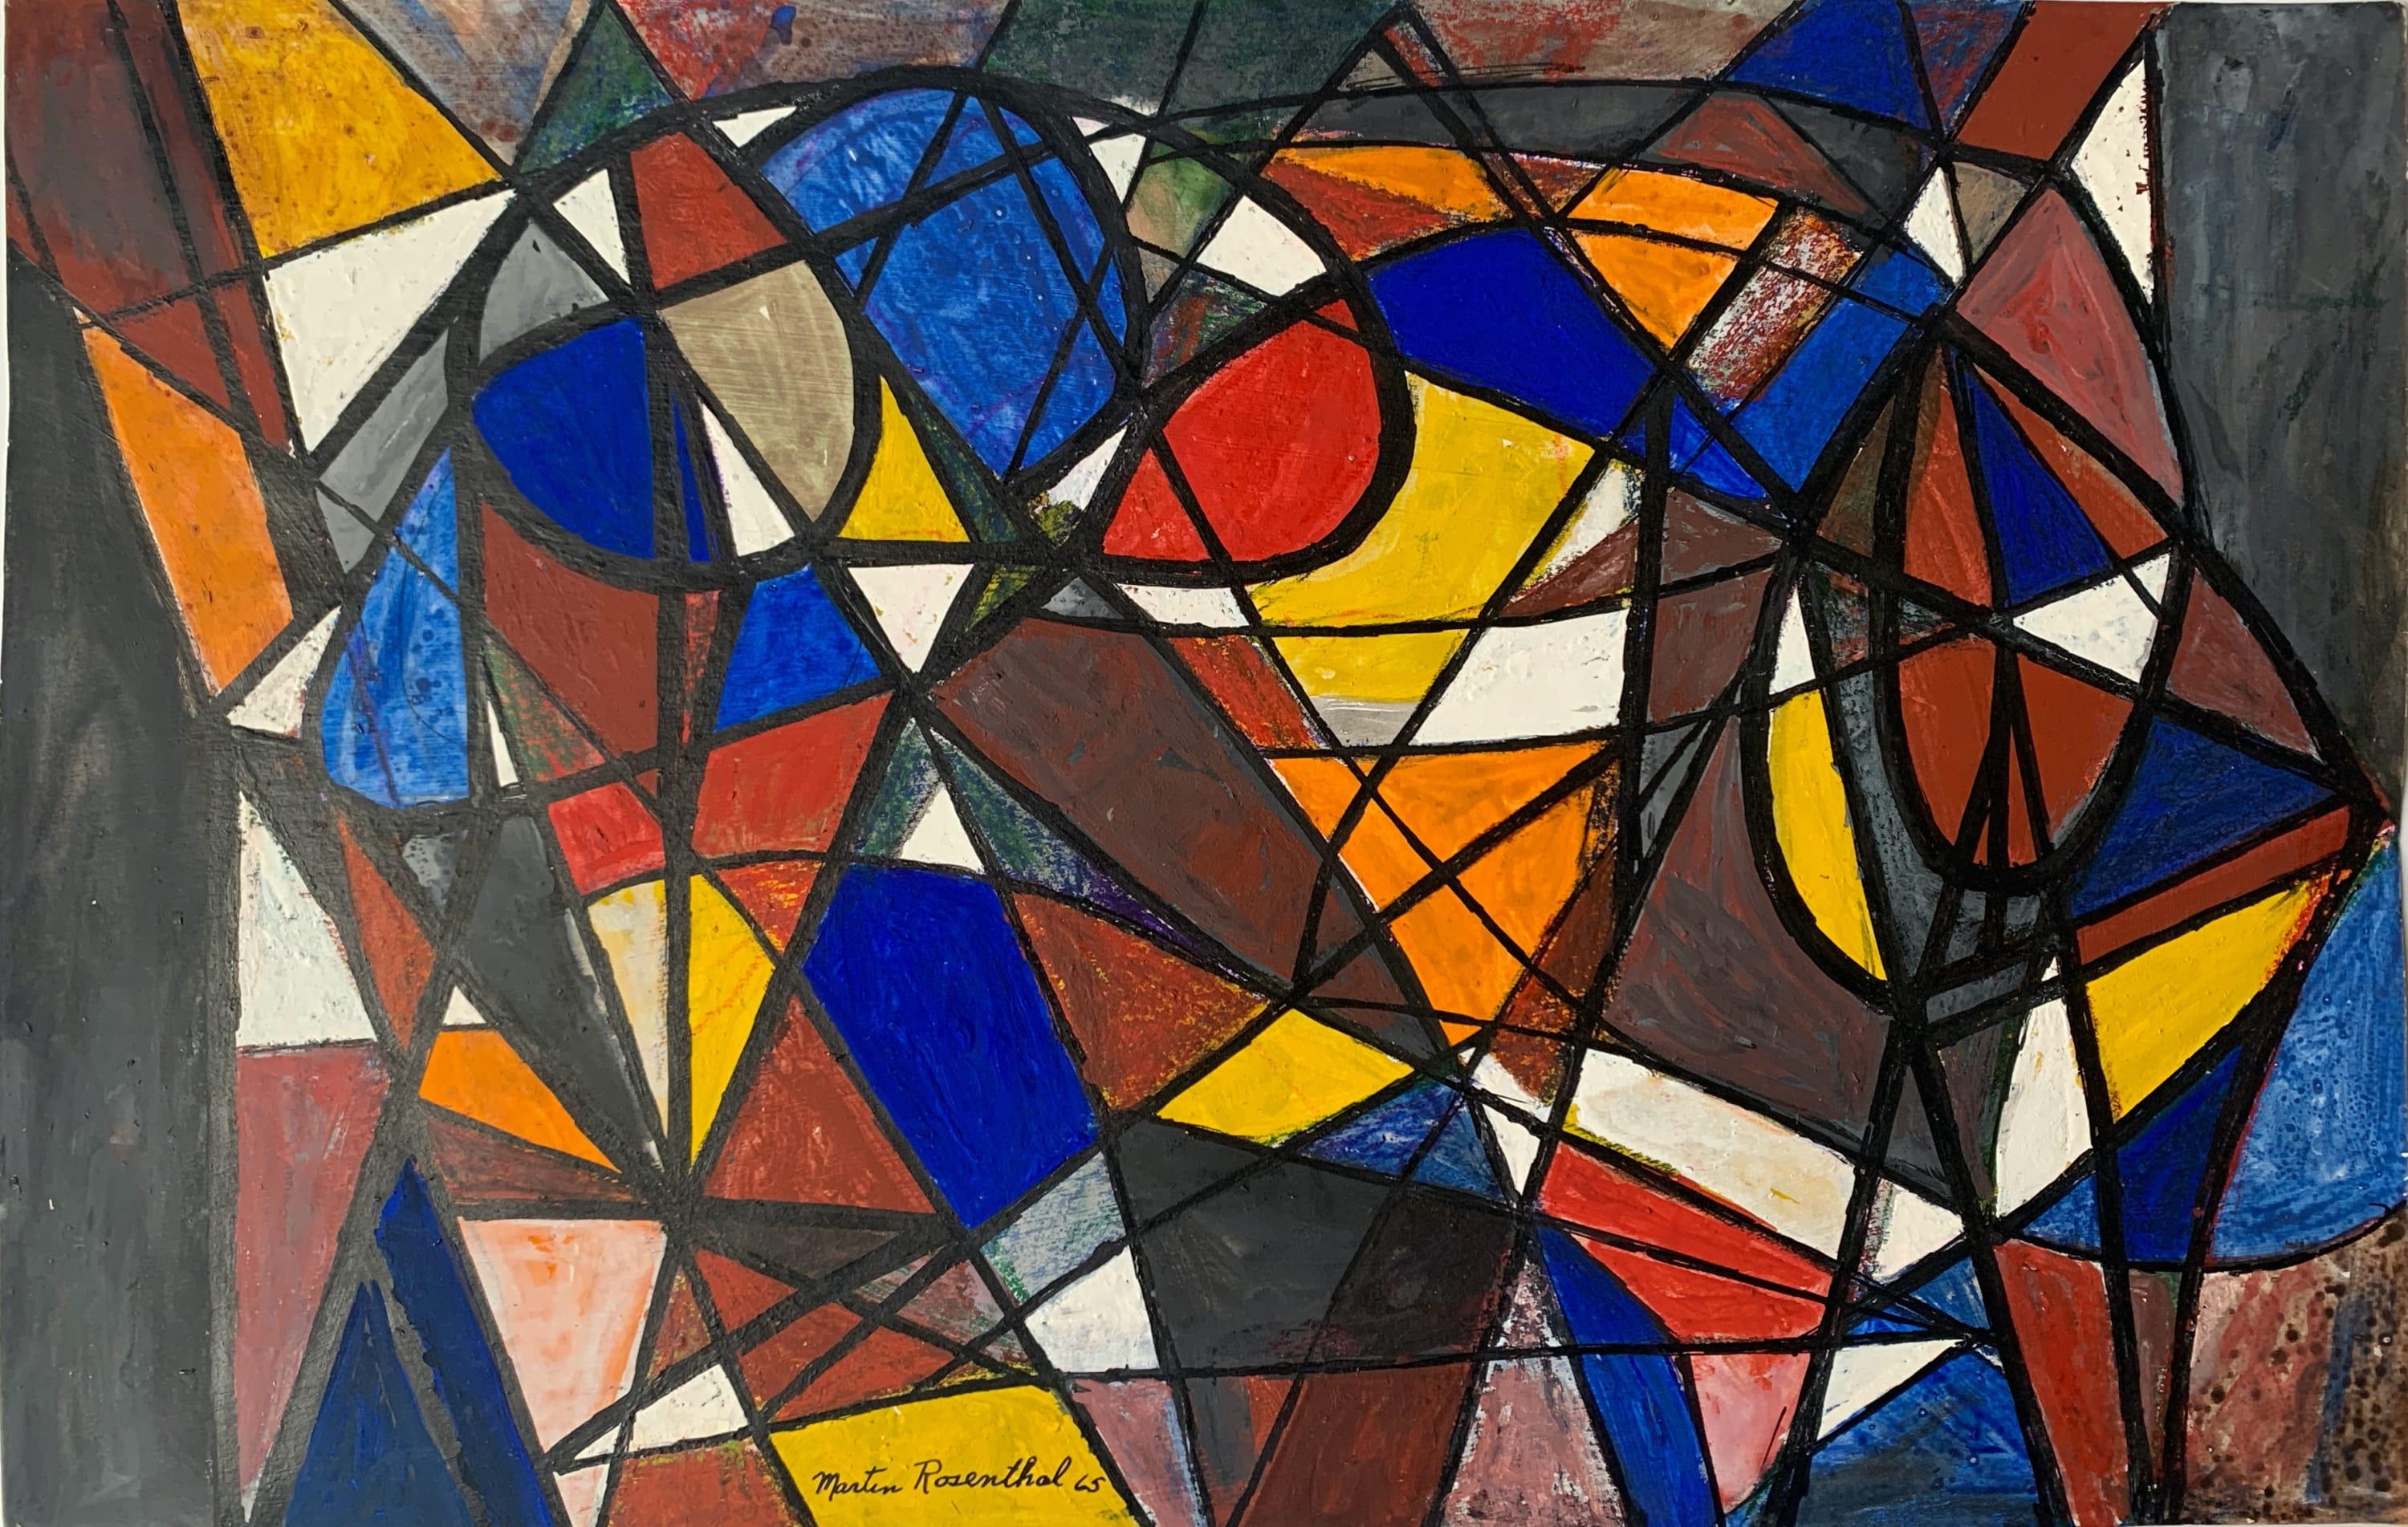 Martin Rosenthal
"Triangles and Semi Circles"
1965
Encaustic & Oil paint on paper
20"x13" unframed
Signed and dated in ink lower left

Martin Rosenthal 1899-1974
Artist Martin Rosenthal was born in Woburn, MA.
He completed military service in 1925